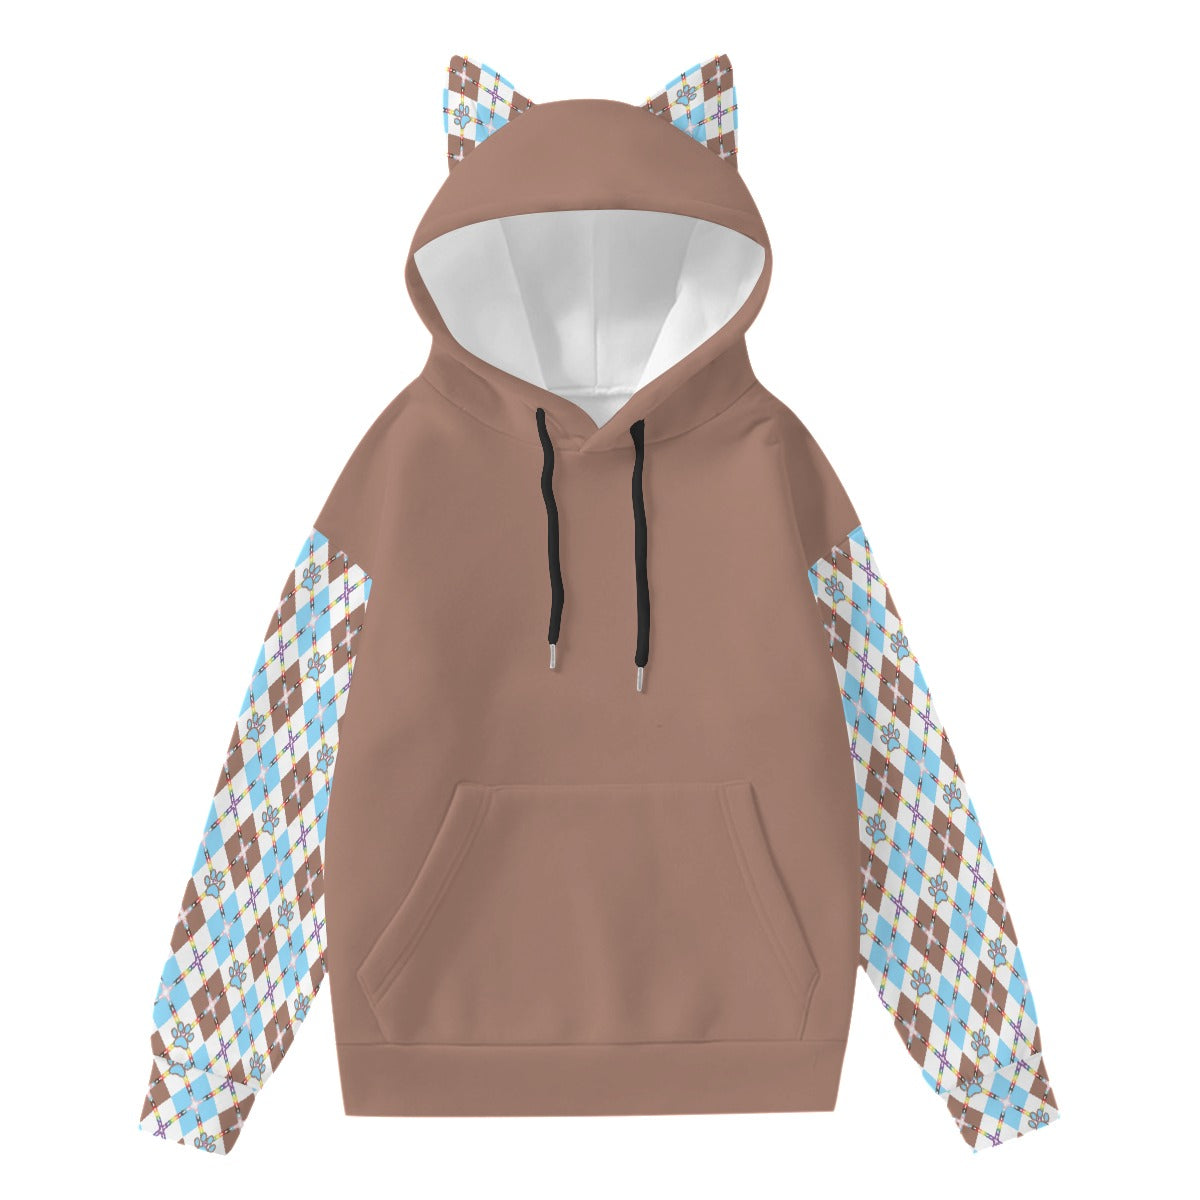 Furry Pride Hoodie With Decorative Ears | Solid with Plaid Sleeves and Ears | Choose Your Colour and Pattern